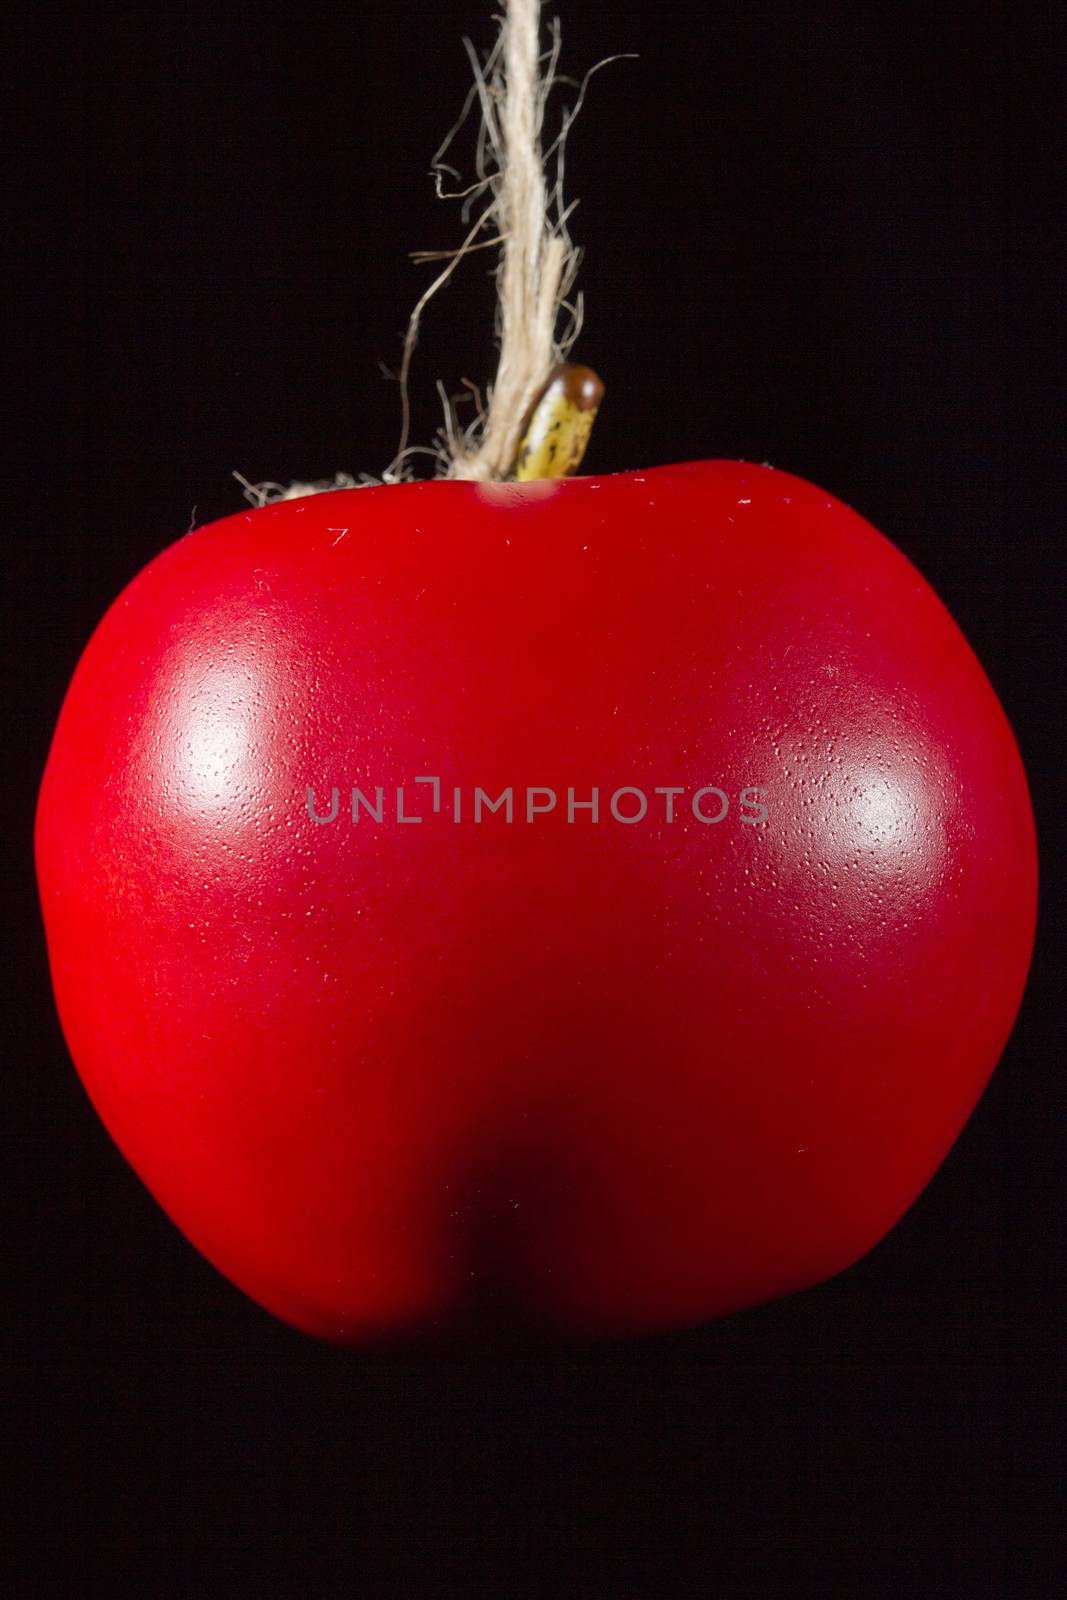 Red ripe apple on a rope by VIPDesignUSA